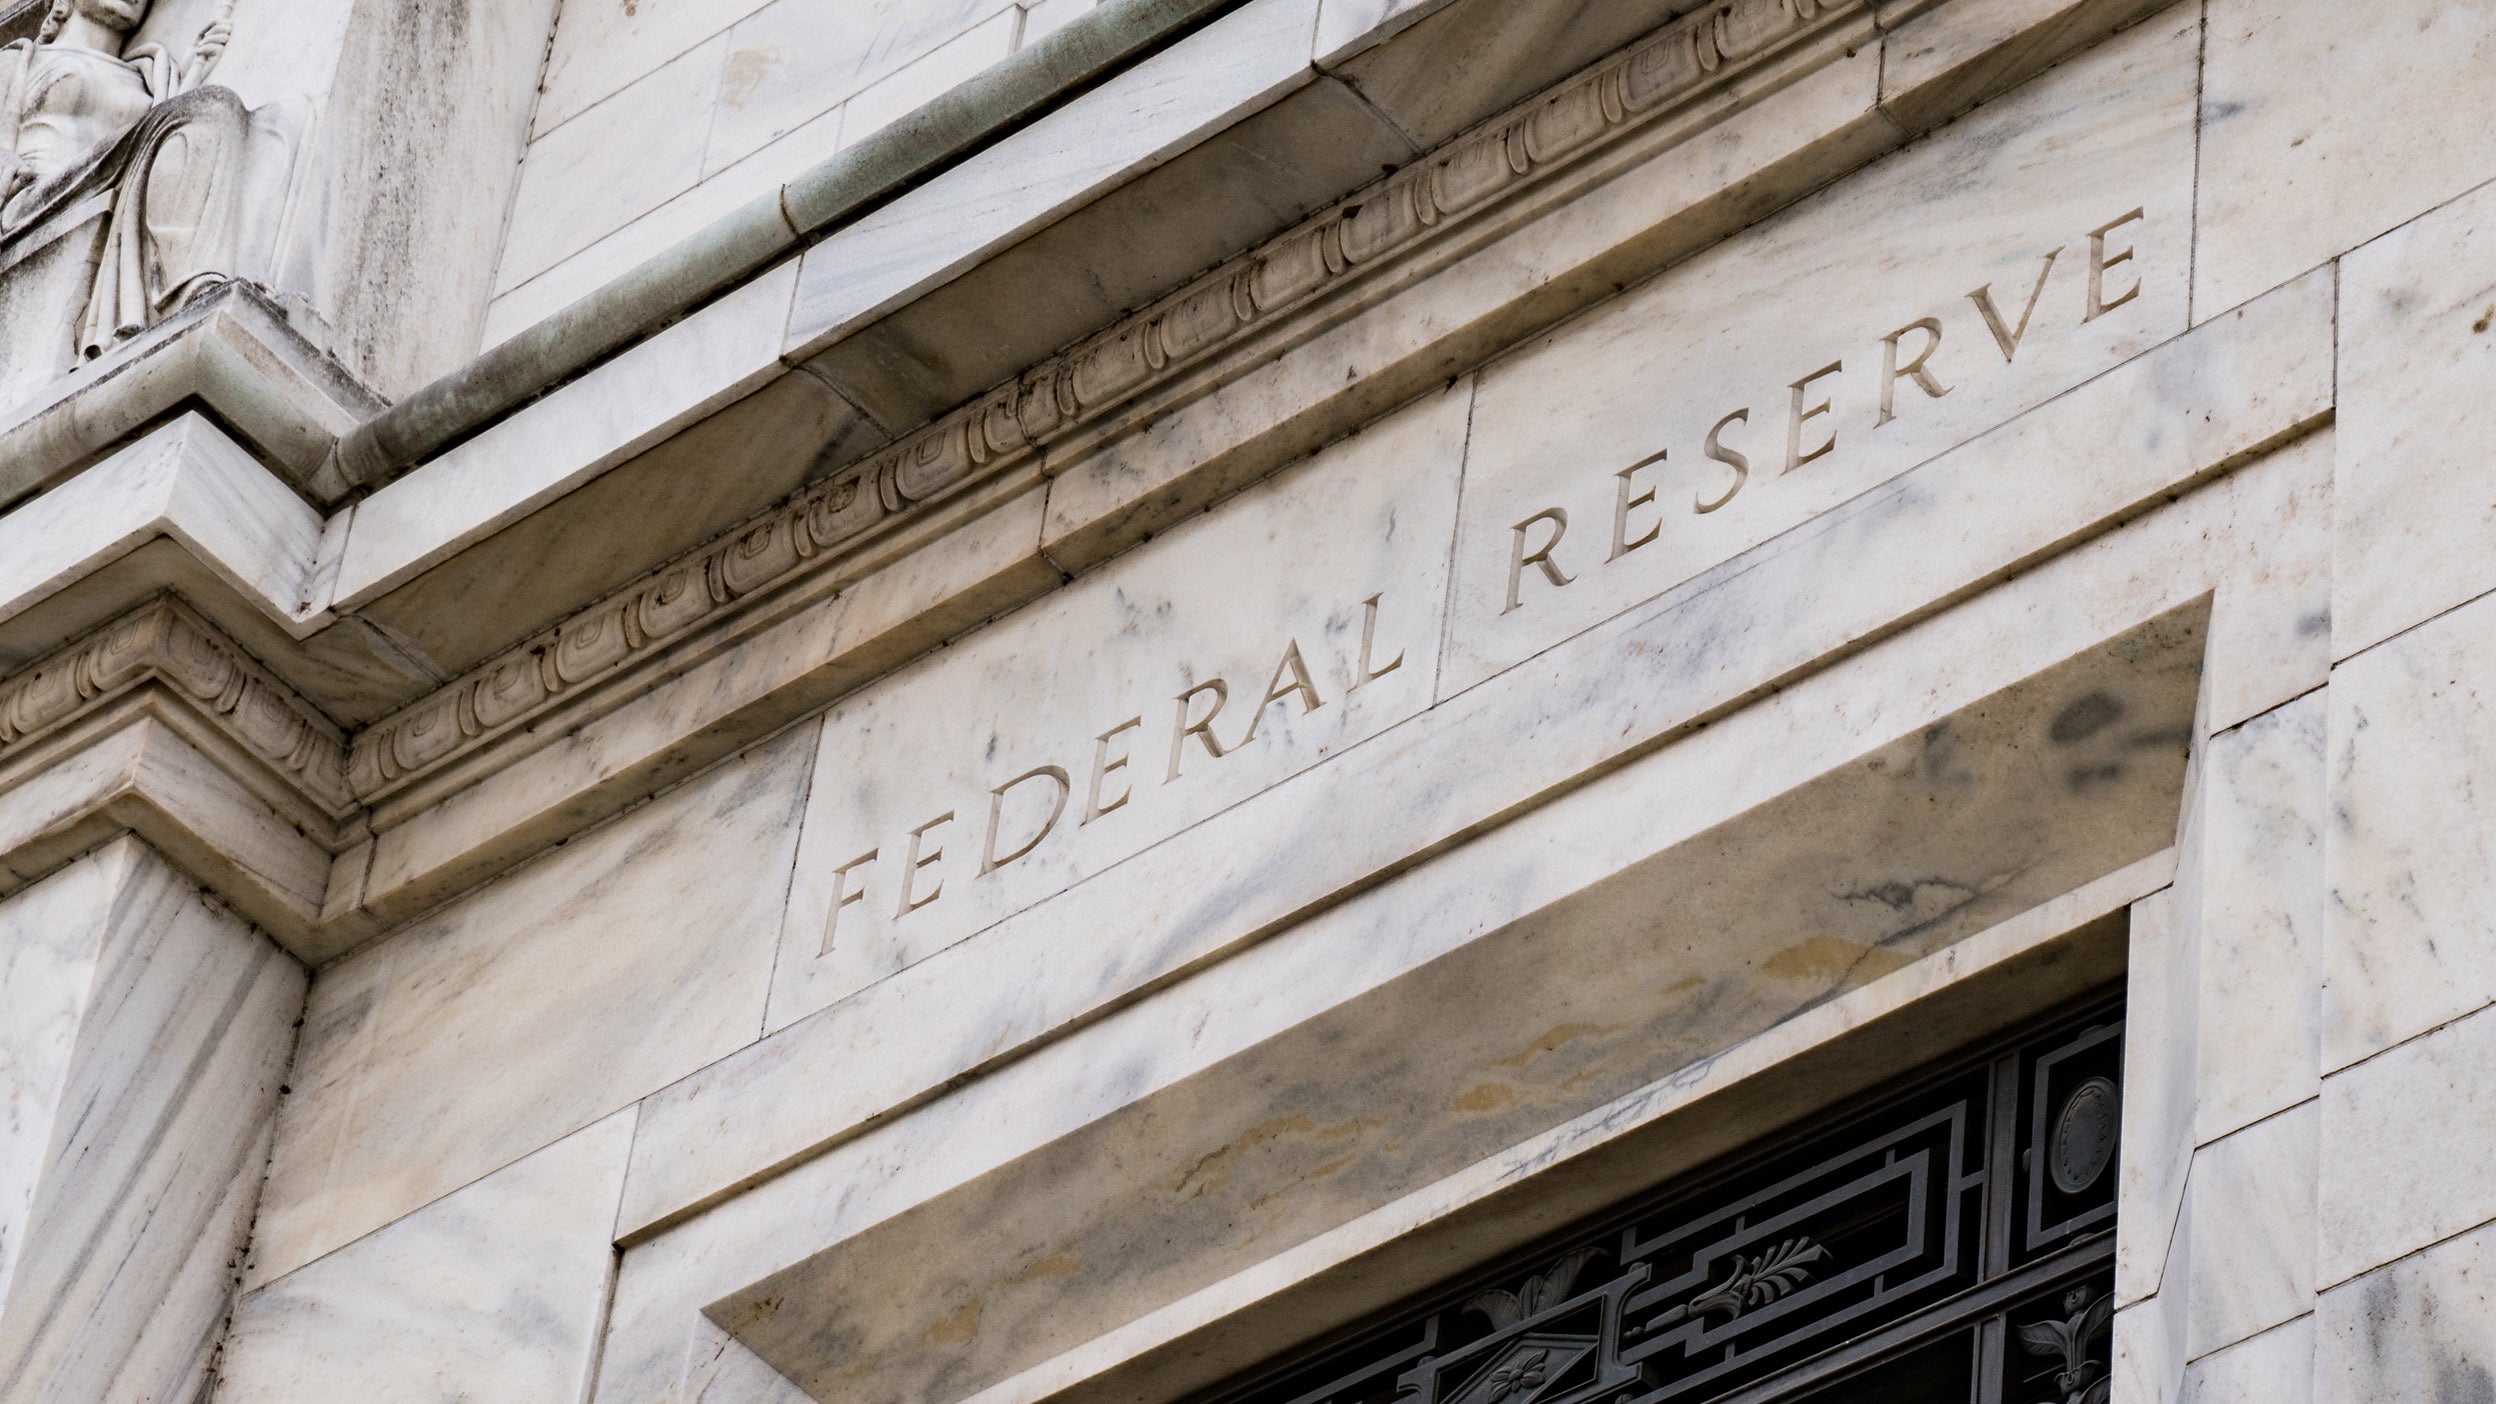 The Fed appears to give with its left hand but take away with its right